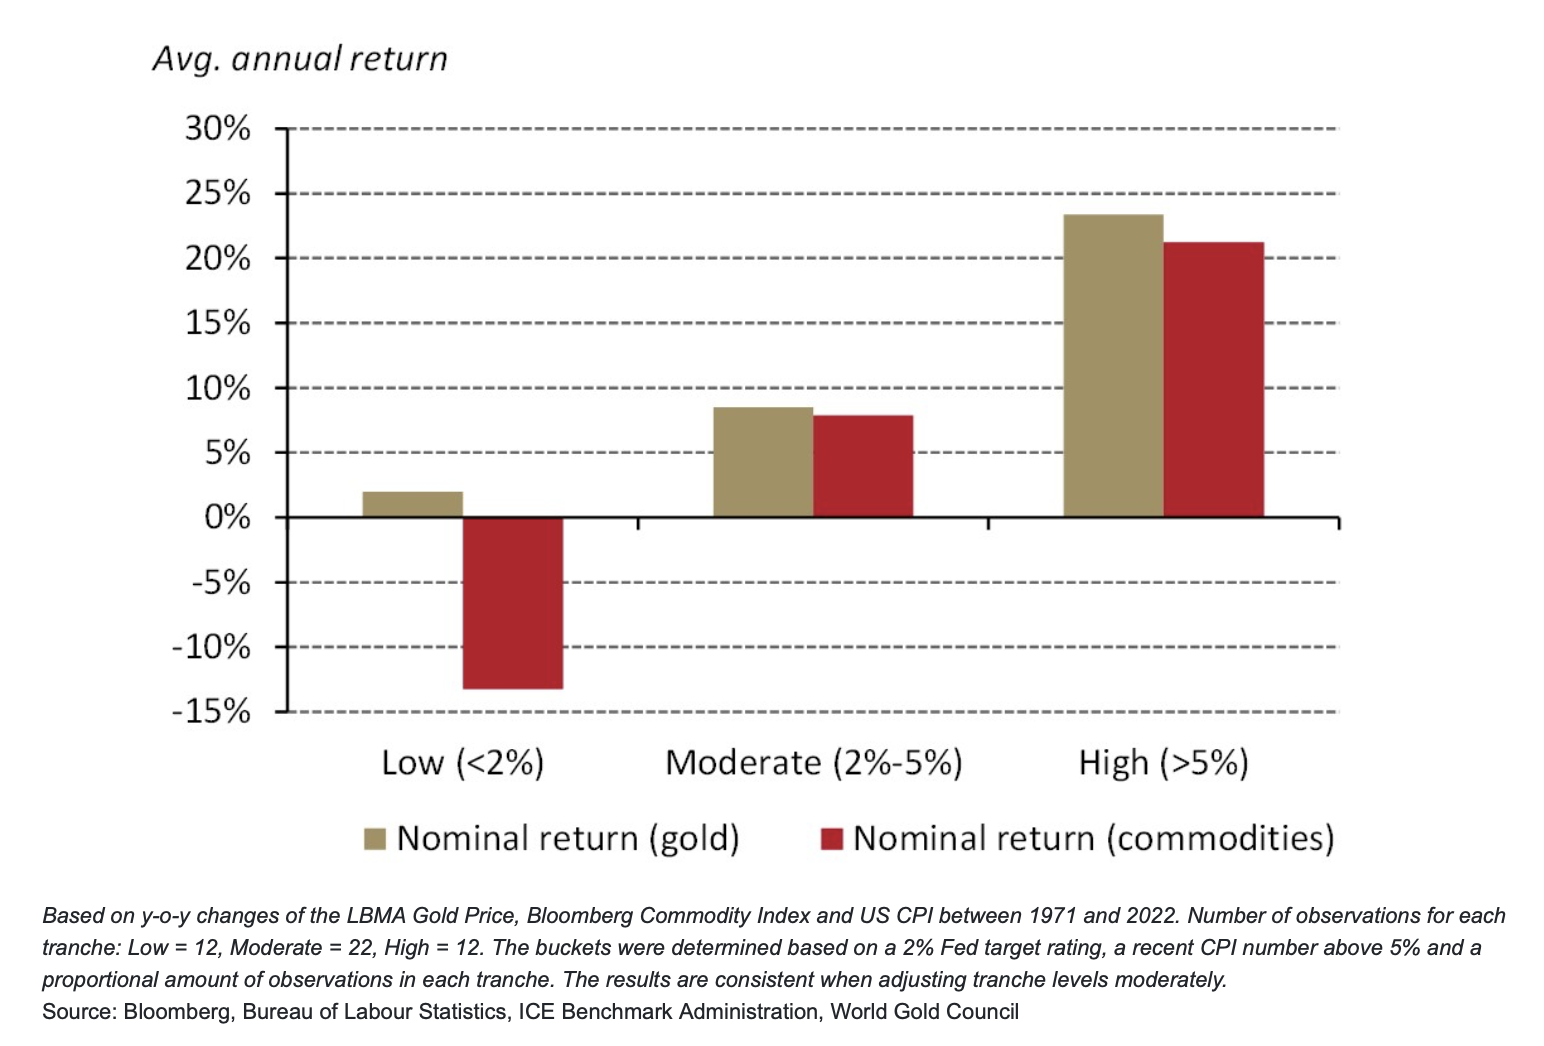 bar chart comparing gold and commodities indices returns under different inflation scenarios